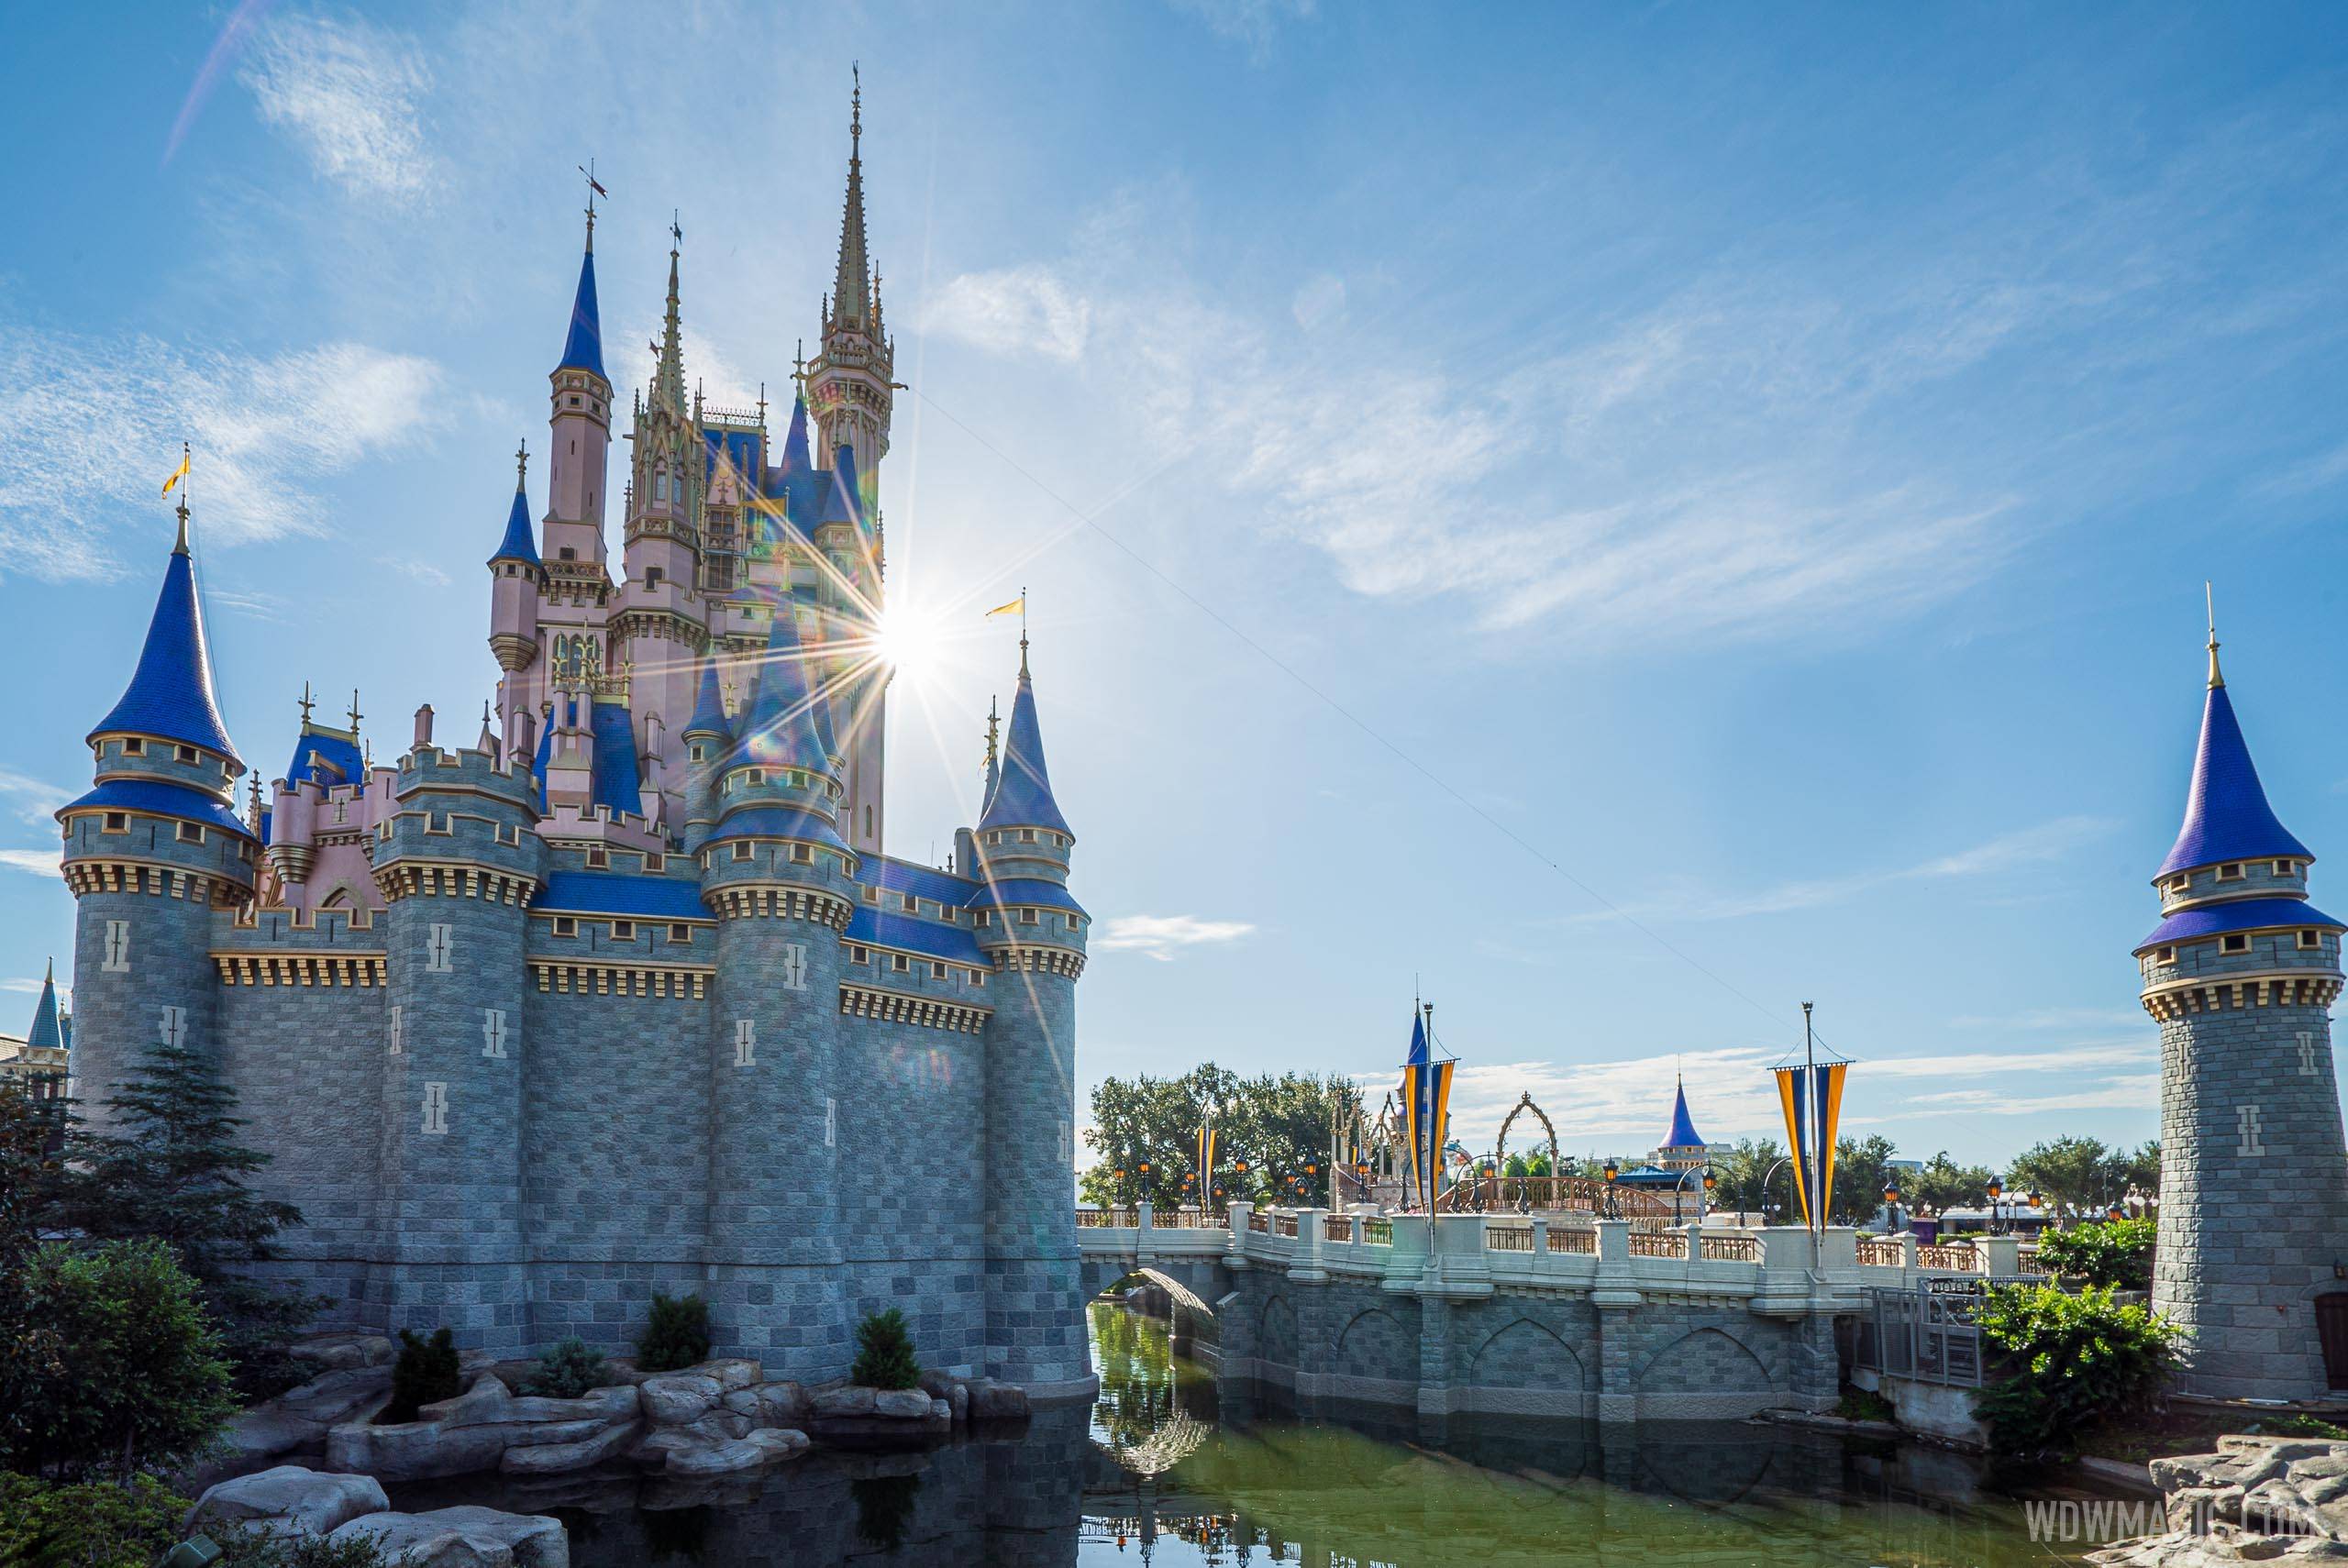 Walt Disney World continues to gain more attendance despite rising COVID cases throughout the country